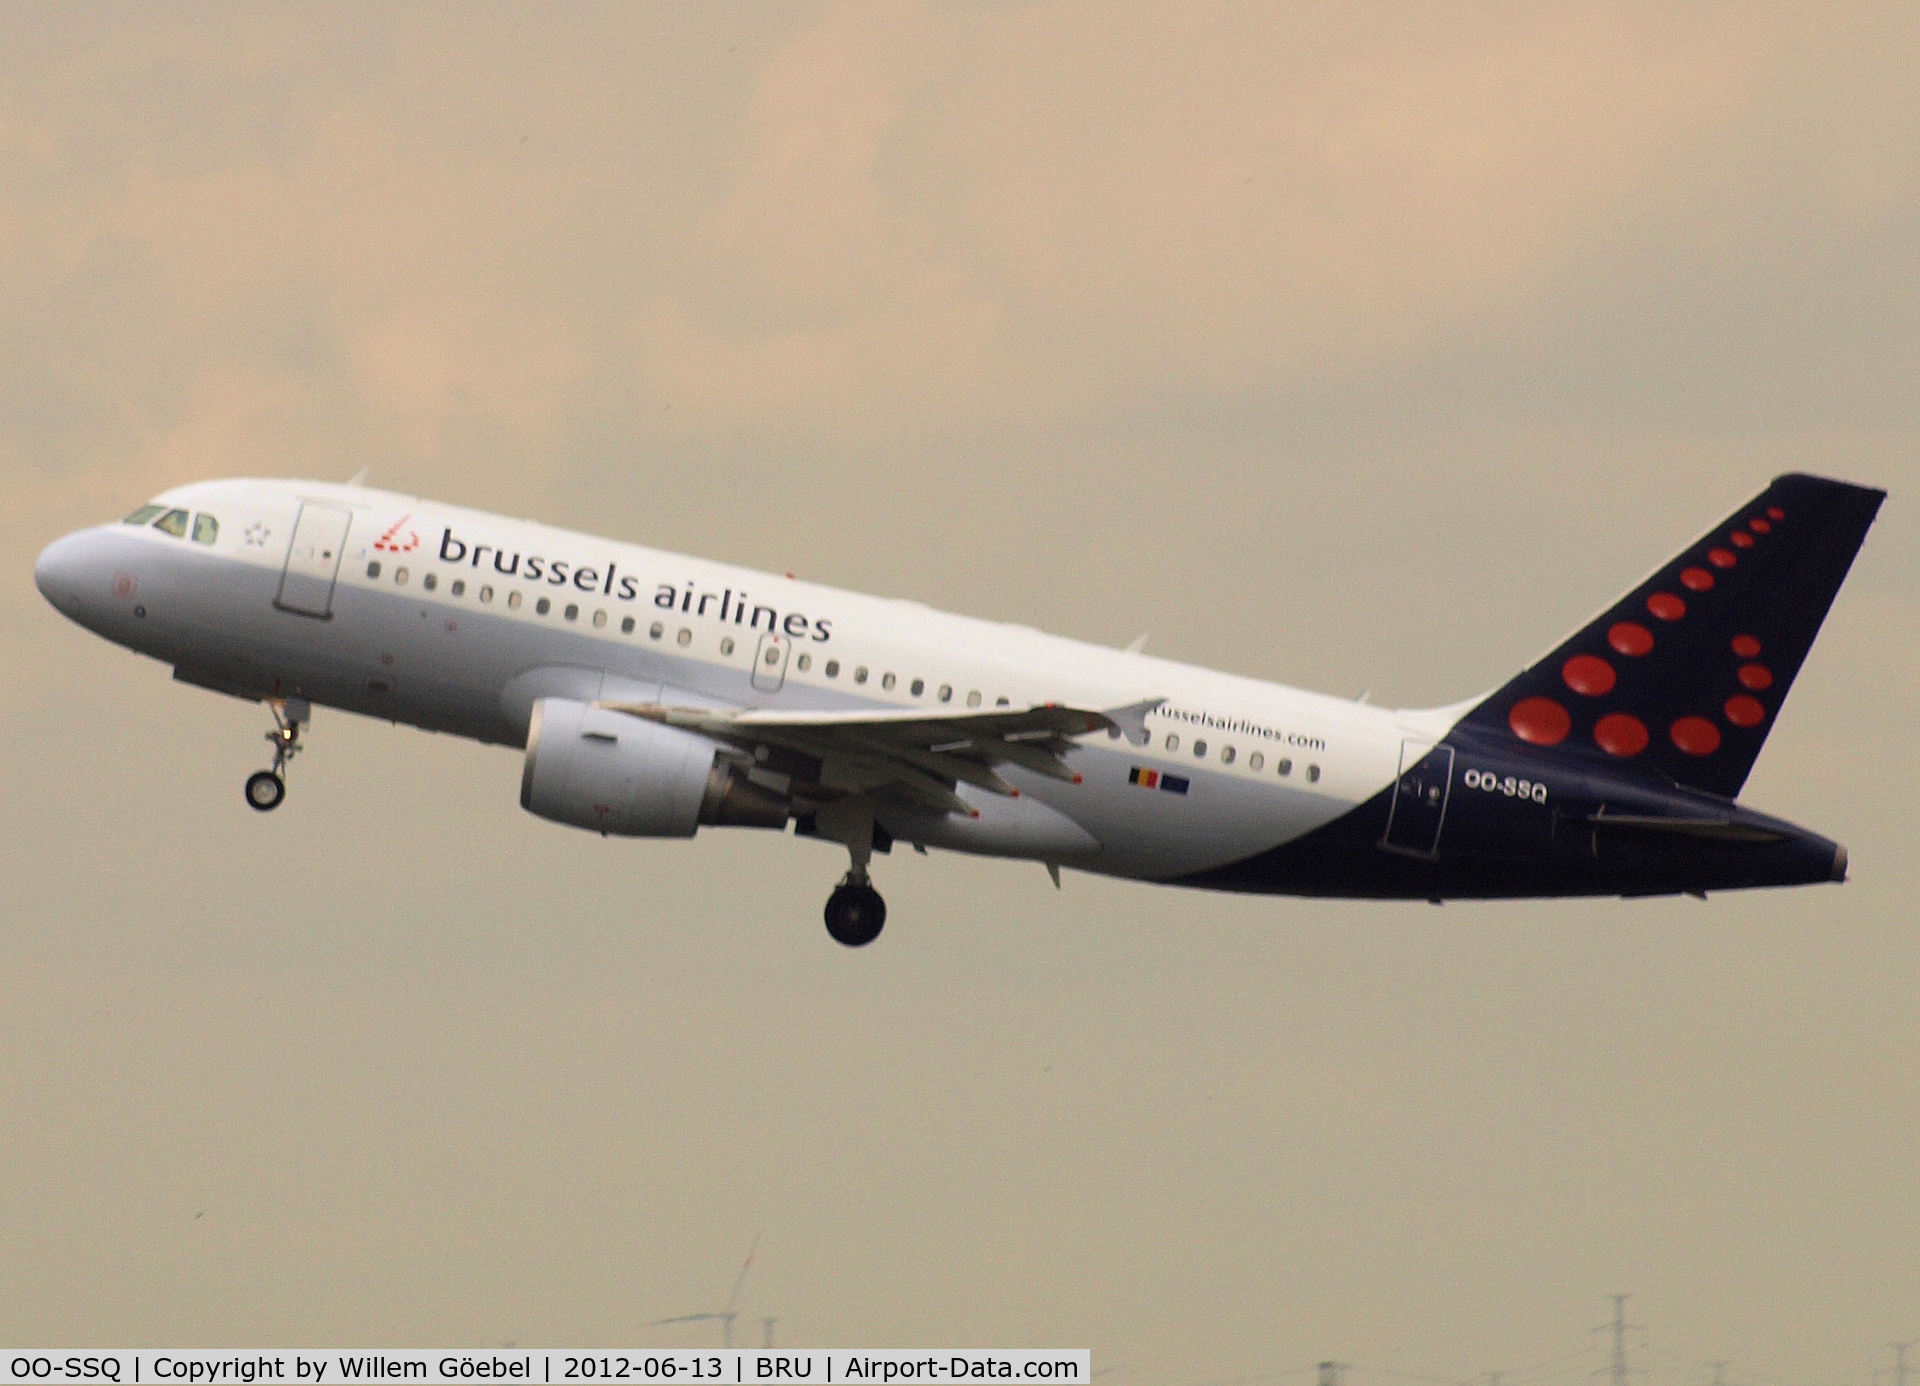 OO-SSQ, 2009 Airbus A319-112 C/N 3790, Take off from Brussel Airport